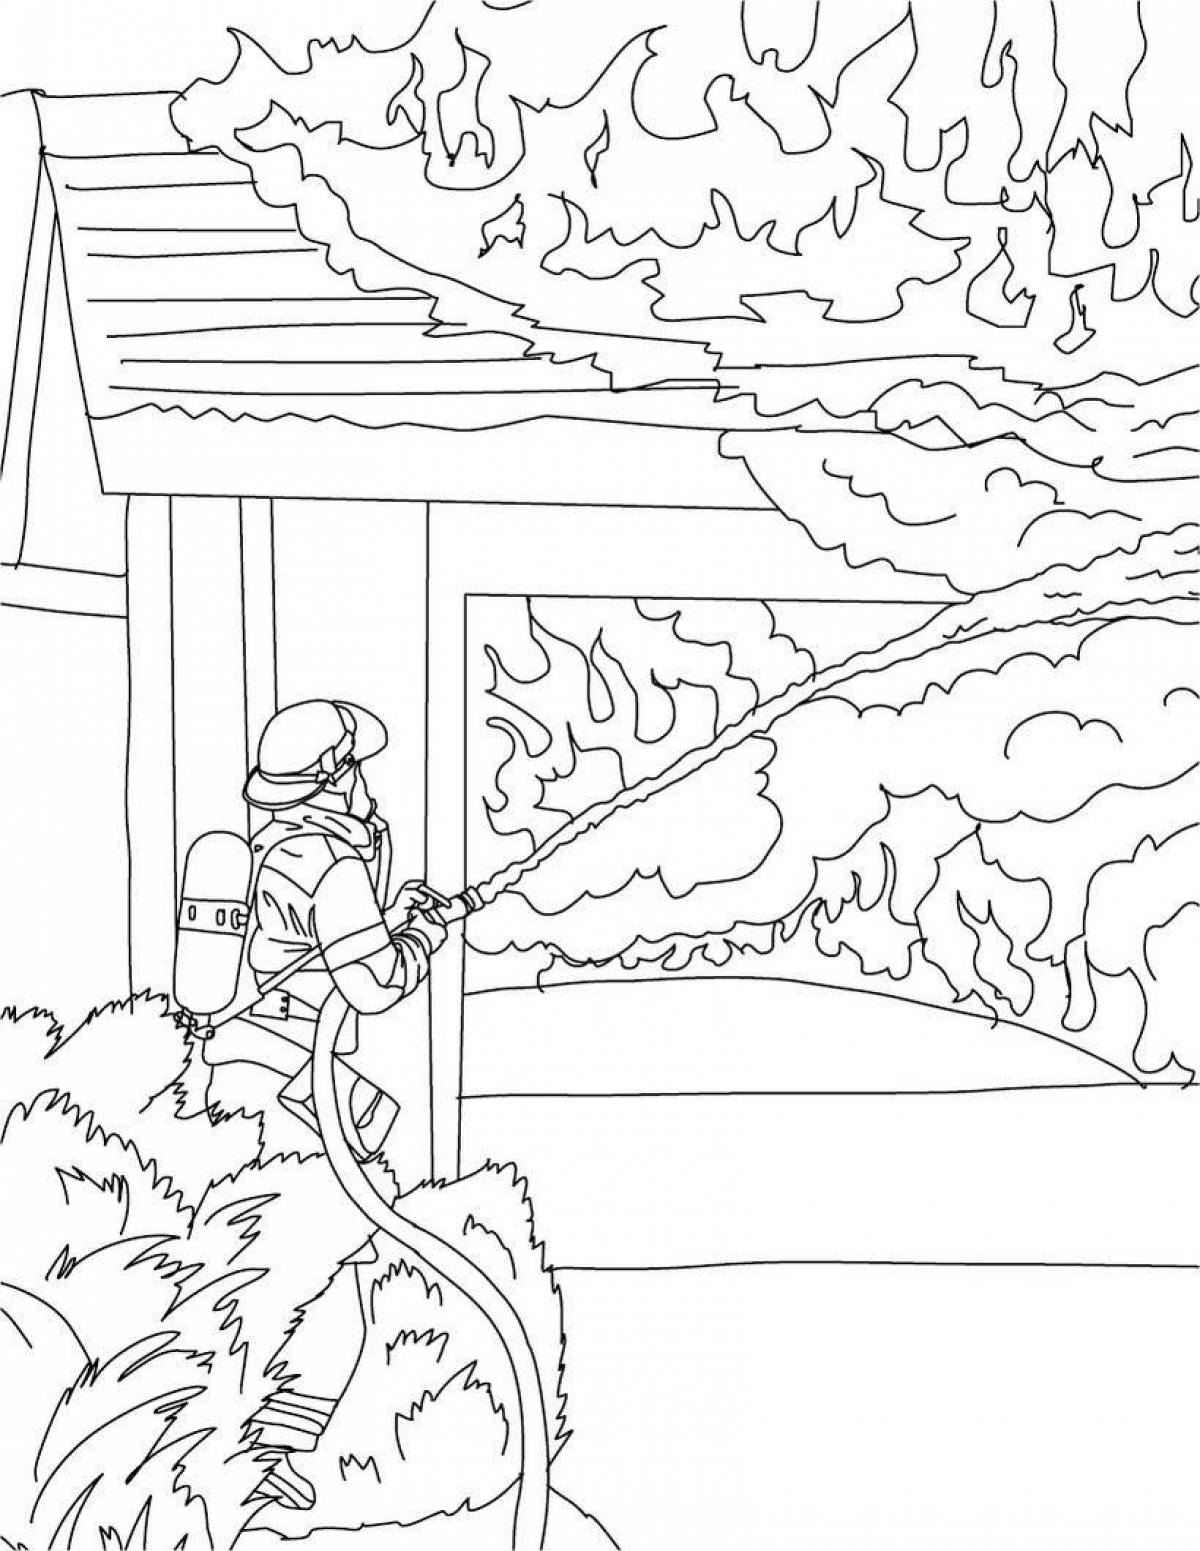 Roaring wildfire coloring page